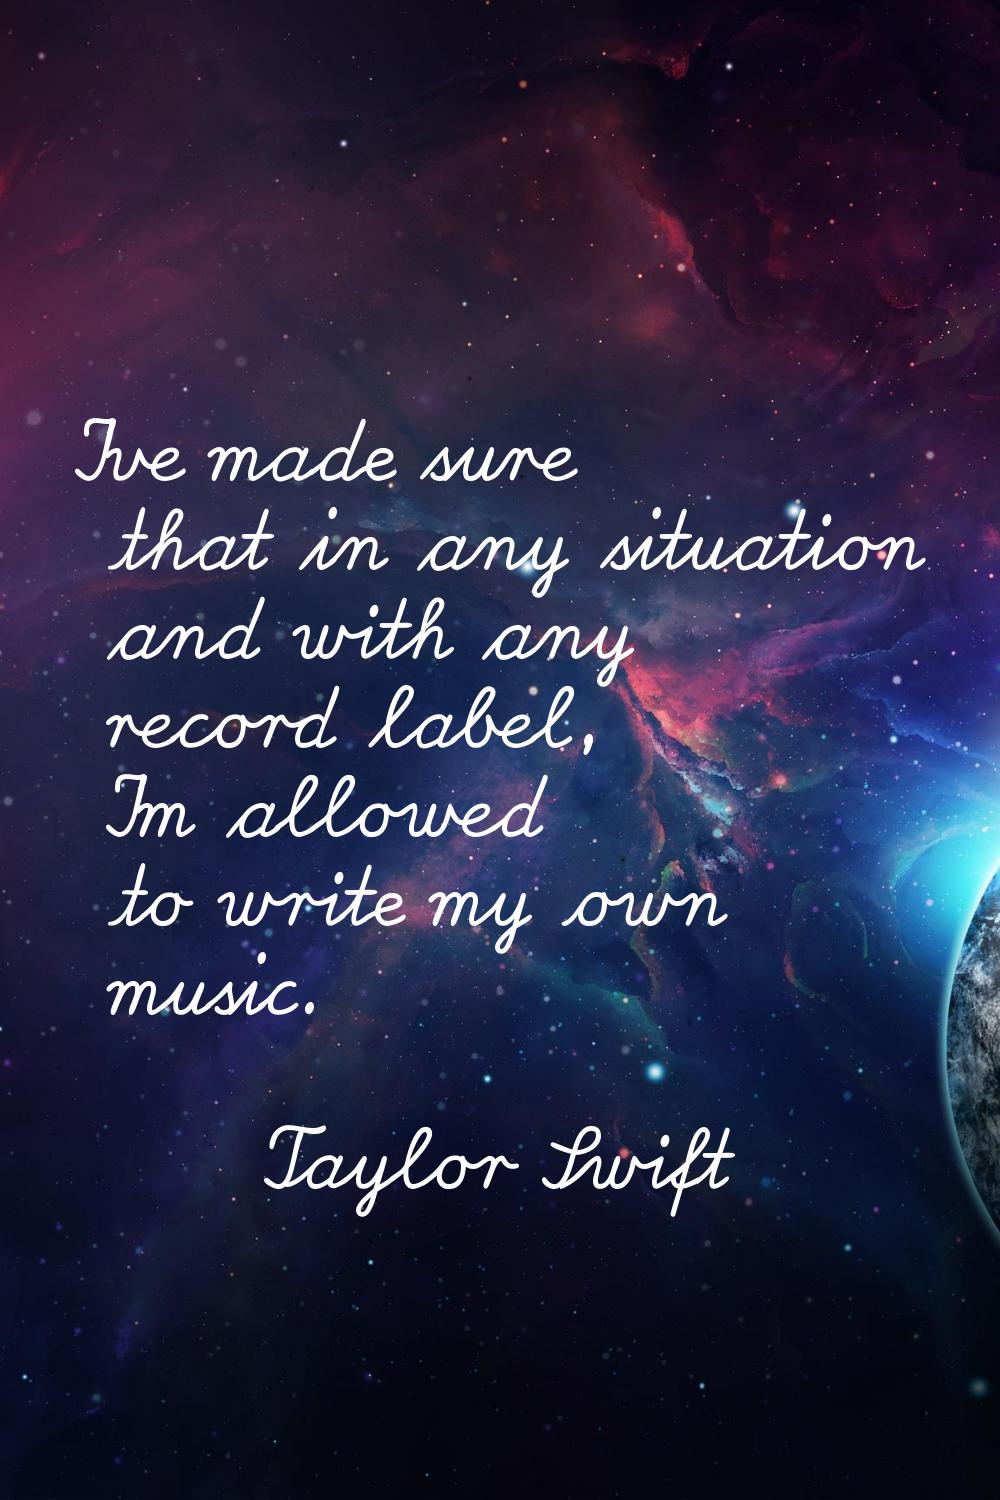 I've made sure that in any situation and with any record label, I'm allowed to write my own music.